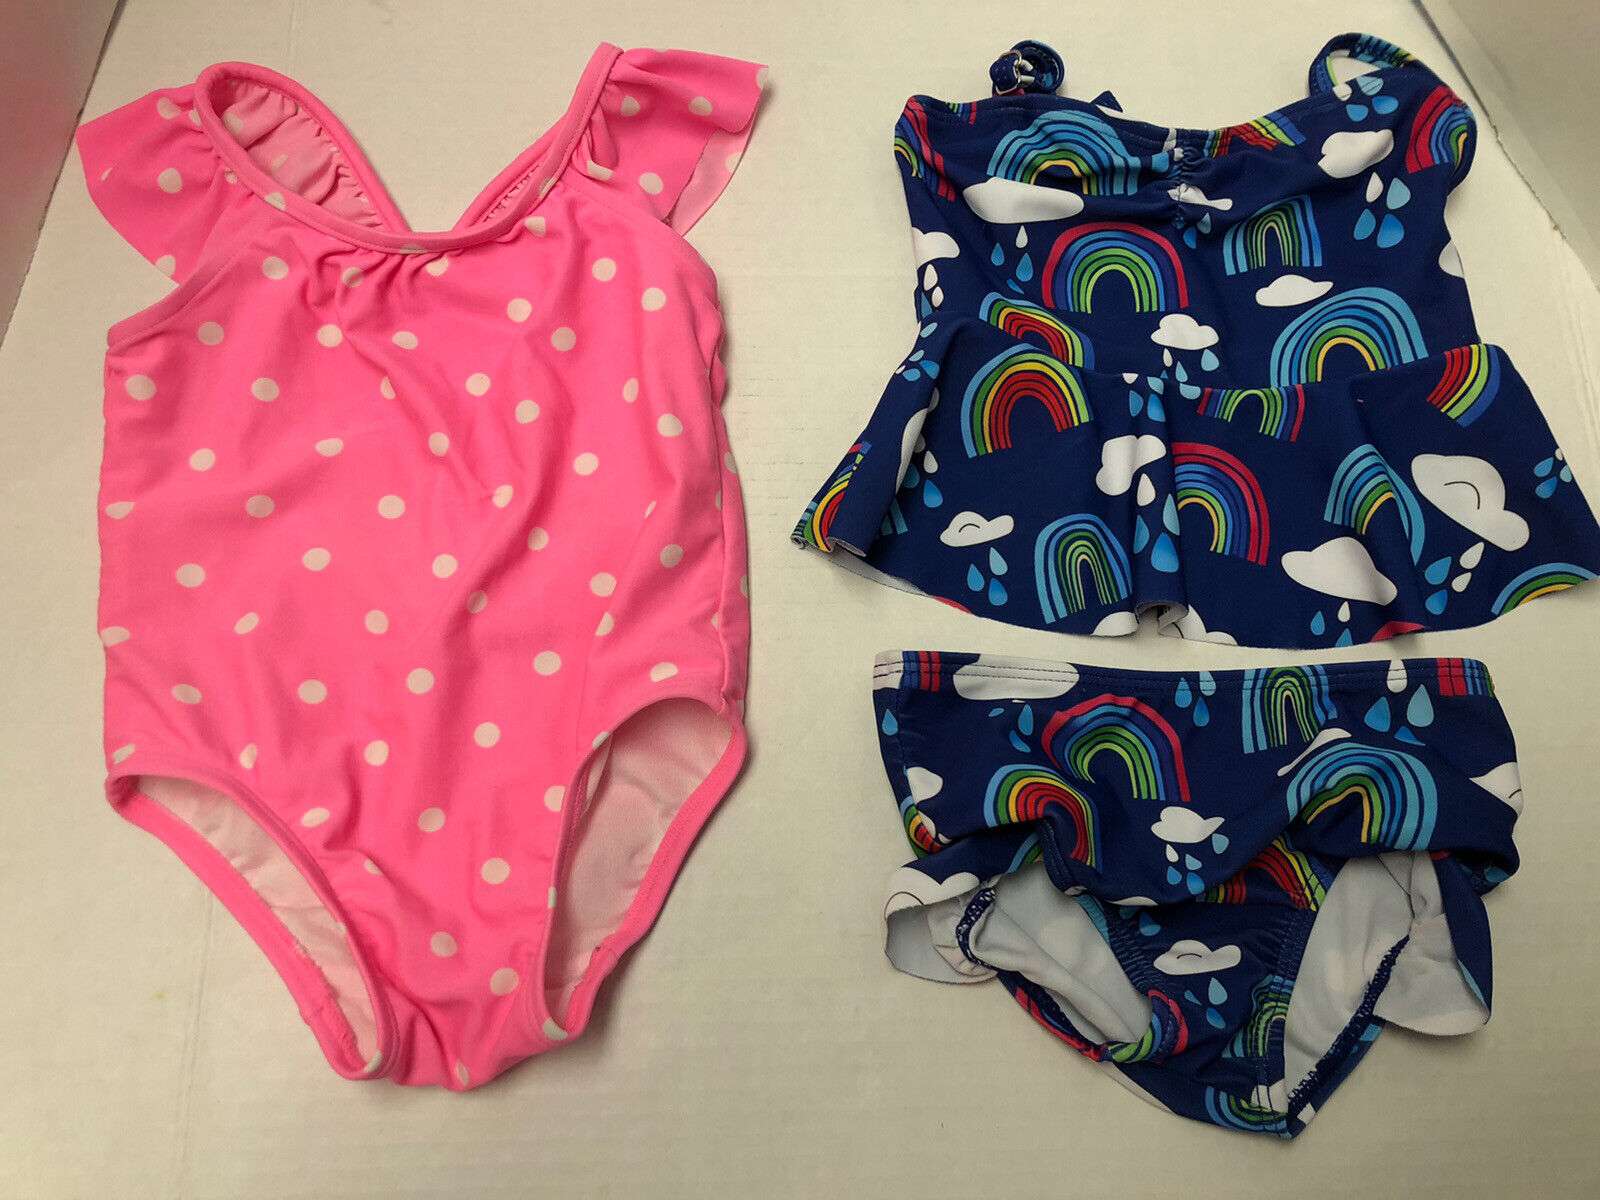 2-Baby Gap (&Unbranded) Infant Girls Size 6-12 Months XS Swimsui